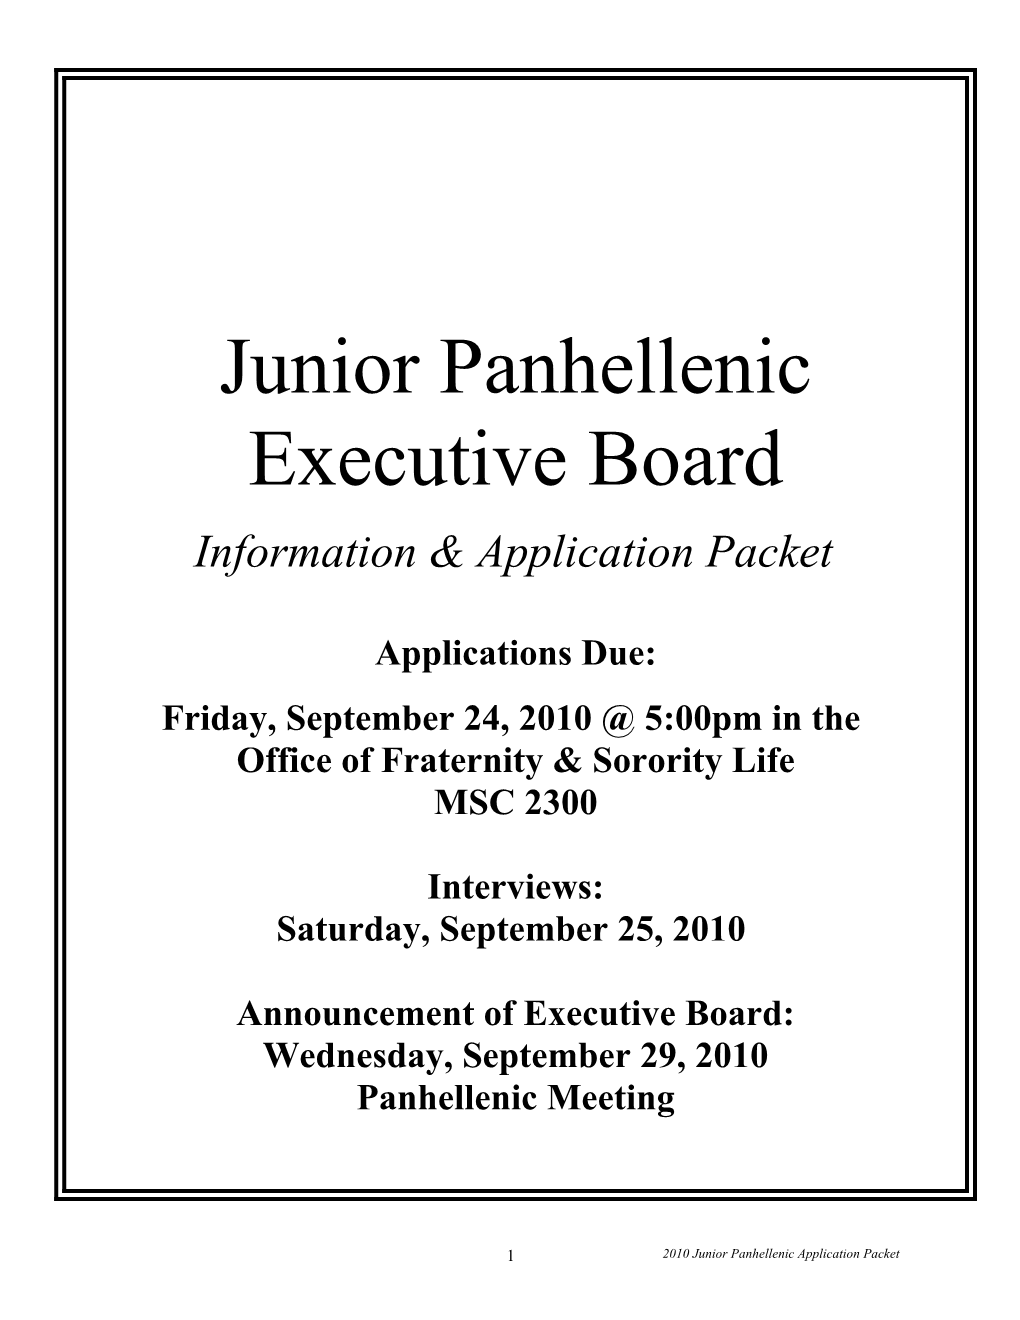 Junior Panhellenic Is a Branch of the Panhellenic Council at the University of South Florida